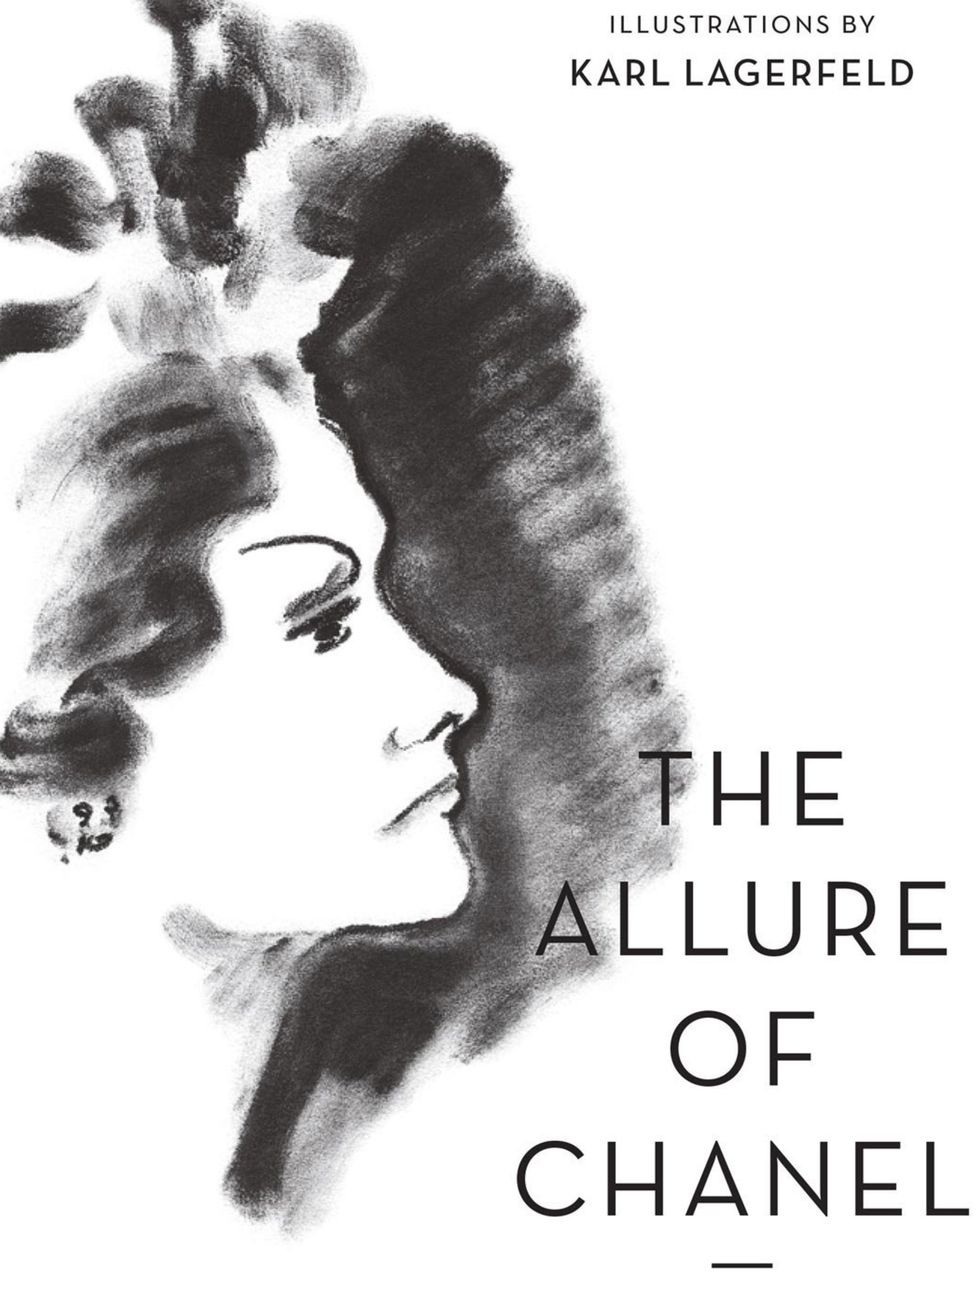 _MAIN 'The-Allure-of-Chanel',-illustrated-by-Karl-Lagerfeld